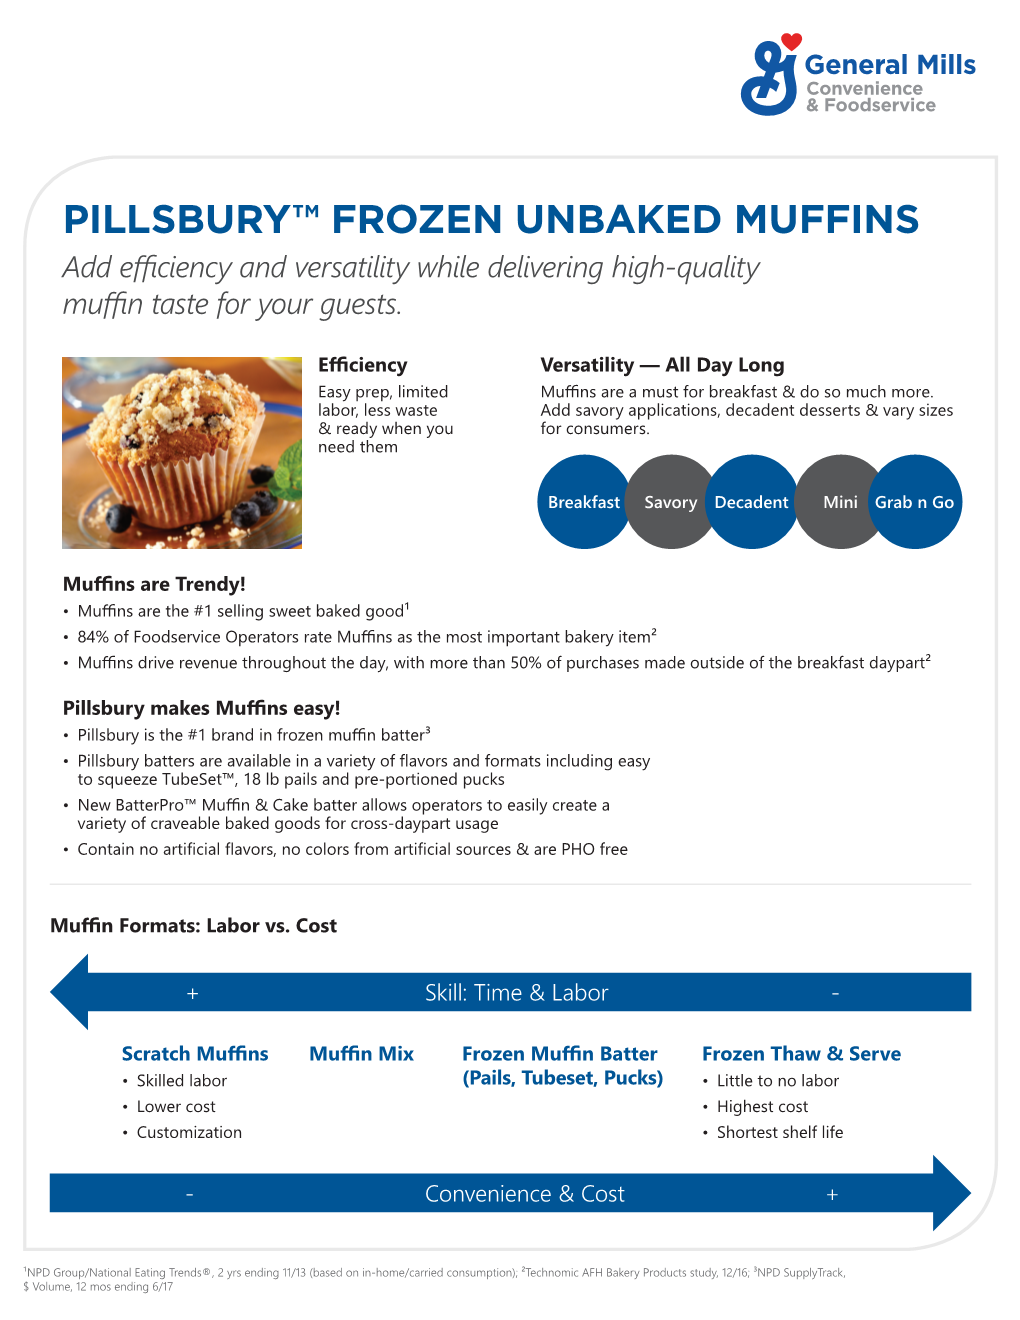 PILLSBURY™ FROZEN UNBAKED MUFFINS Add Efficiency and Versatility While Delivering High-Quality Muffin Taste for Your Guests